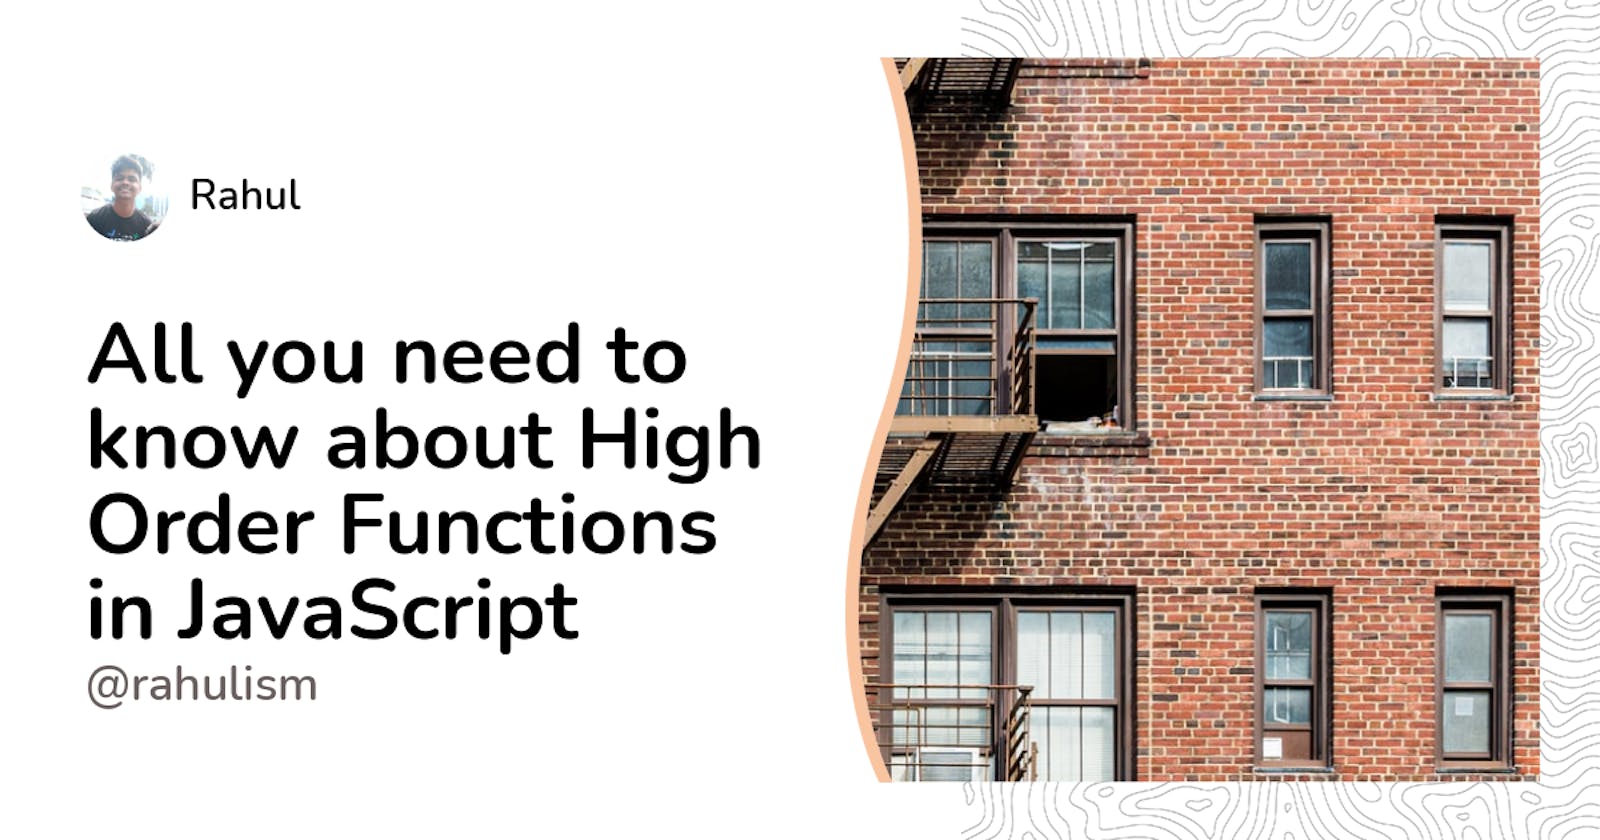 All you need to know about High Order Functions in JavaScript